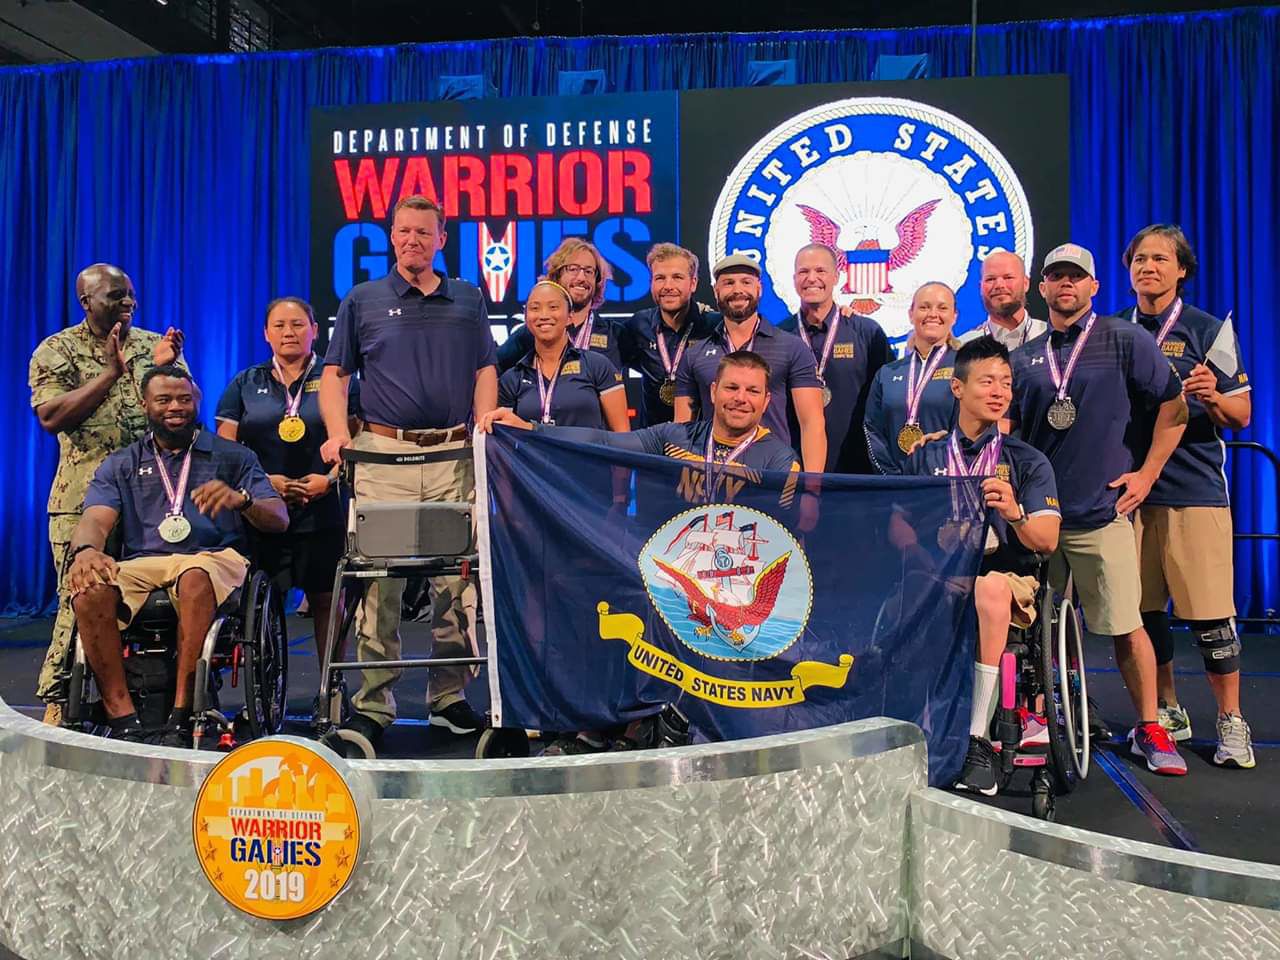 Parker brings home the gold for Team Navy in DoD Warrior Games